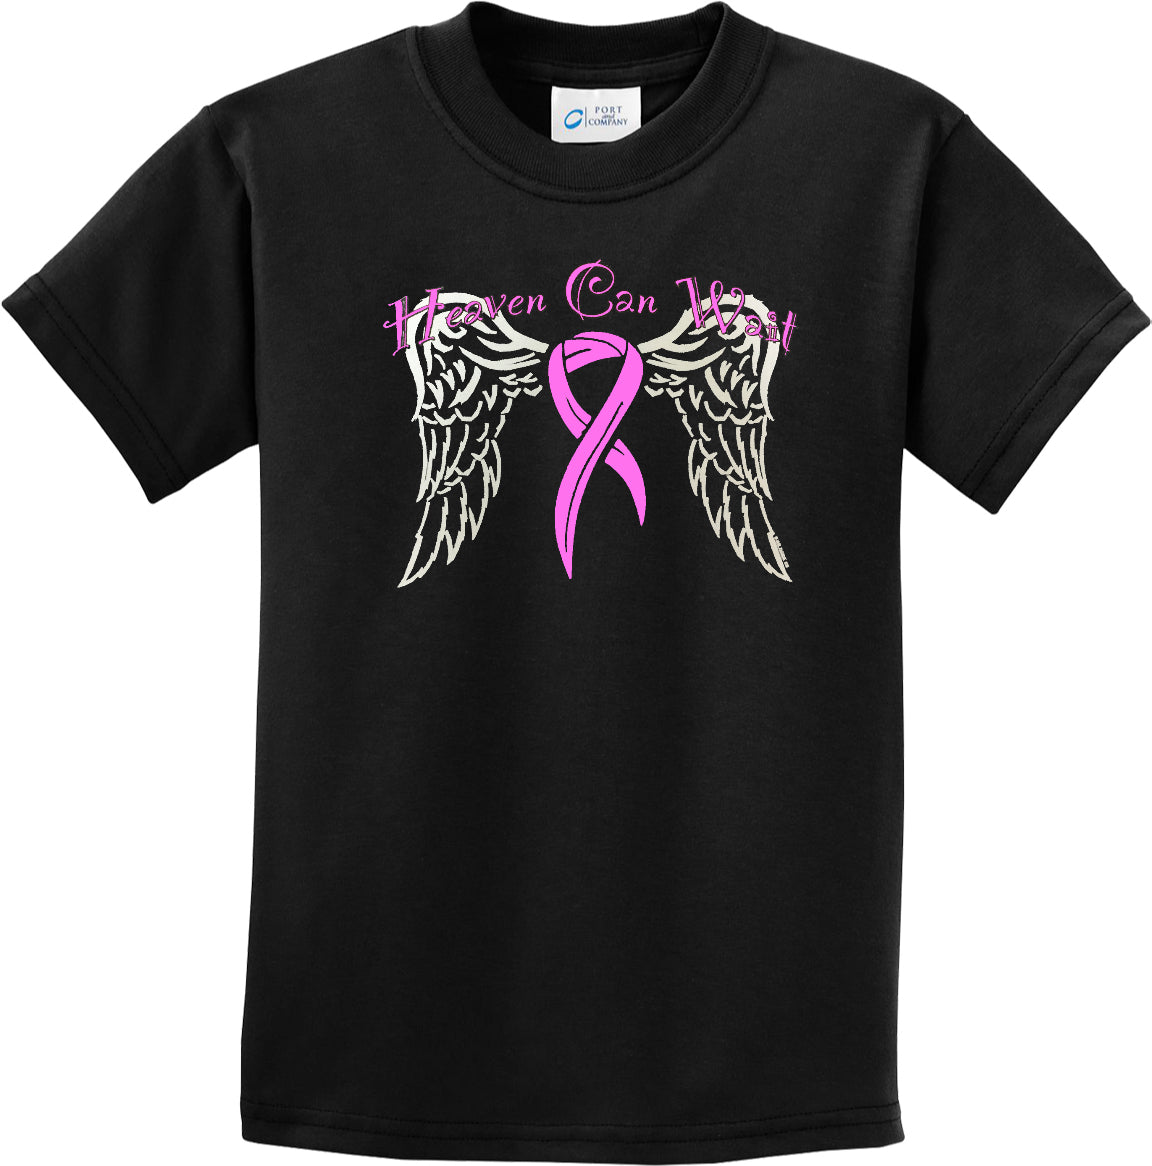 Kids Breast Cancer T-shirt Heaven Can Wait Youth Tee